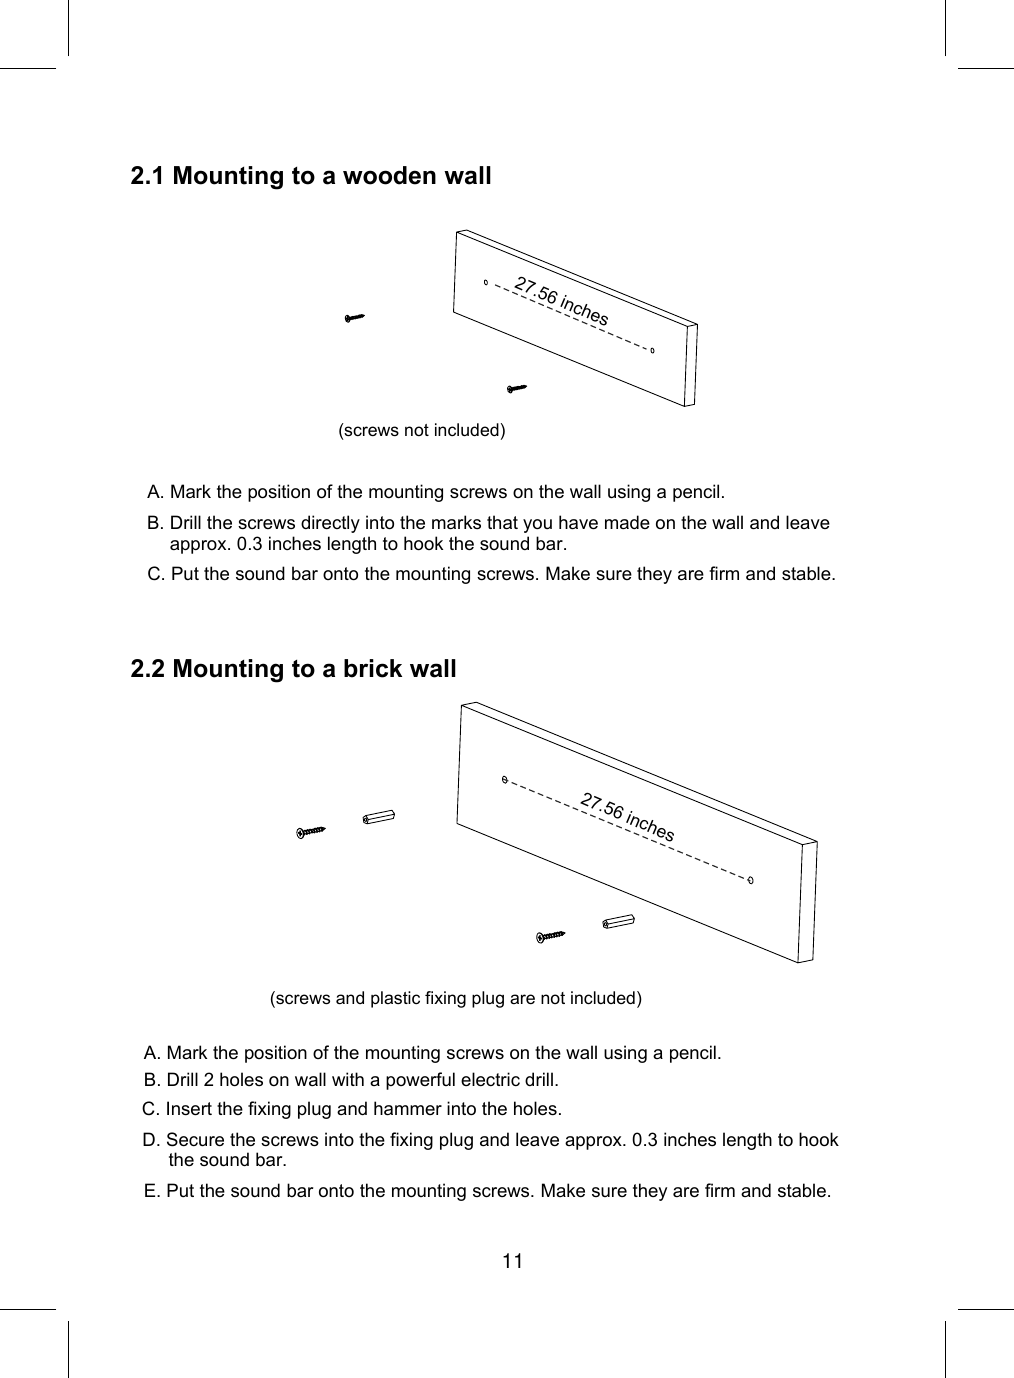 2.1 Mountingto a wooden wallA. Mark the position of the mounting screws on the wall using a pencil.C. Put the sound bar onto the mounting screws. Make sure they are firm and stable.2.2 Mountingto a brick wall27.56 inchesB. Drill the screws directly into the marks that you have made on the wall and leave approx. 0.3 inches length to hook the sound bar.(screws not included)(screws and plastic fixing plug are not included)A. Mark the position of the mounting screws on the wall using a pencil.E. Put the sound bar onto the mounting screws. Make sure they are firm and stable.C. Insert the fixing plug and hammer into the holes.D. Secure the screws into the fixing plug and leave approx. 0.3 inches length to hookthe sound bar.B. Drill 2 holes on wall with a powerful electric drill. 27.56 inches11